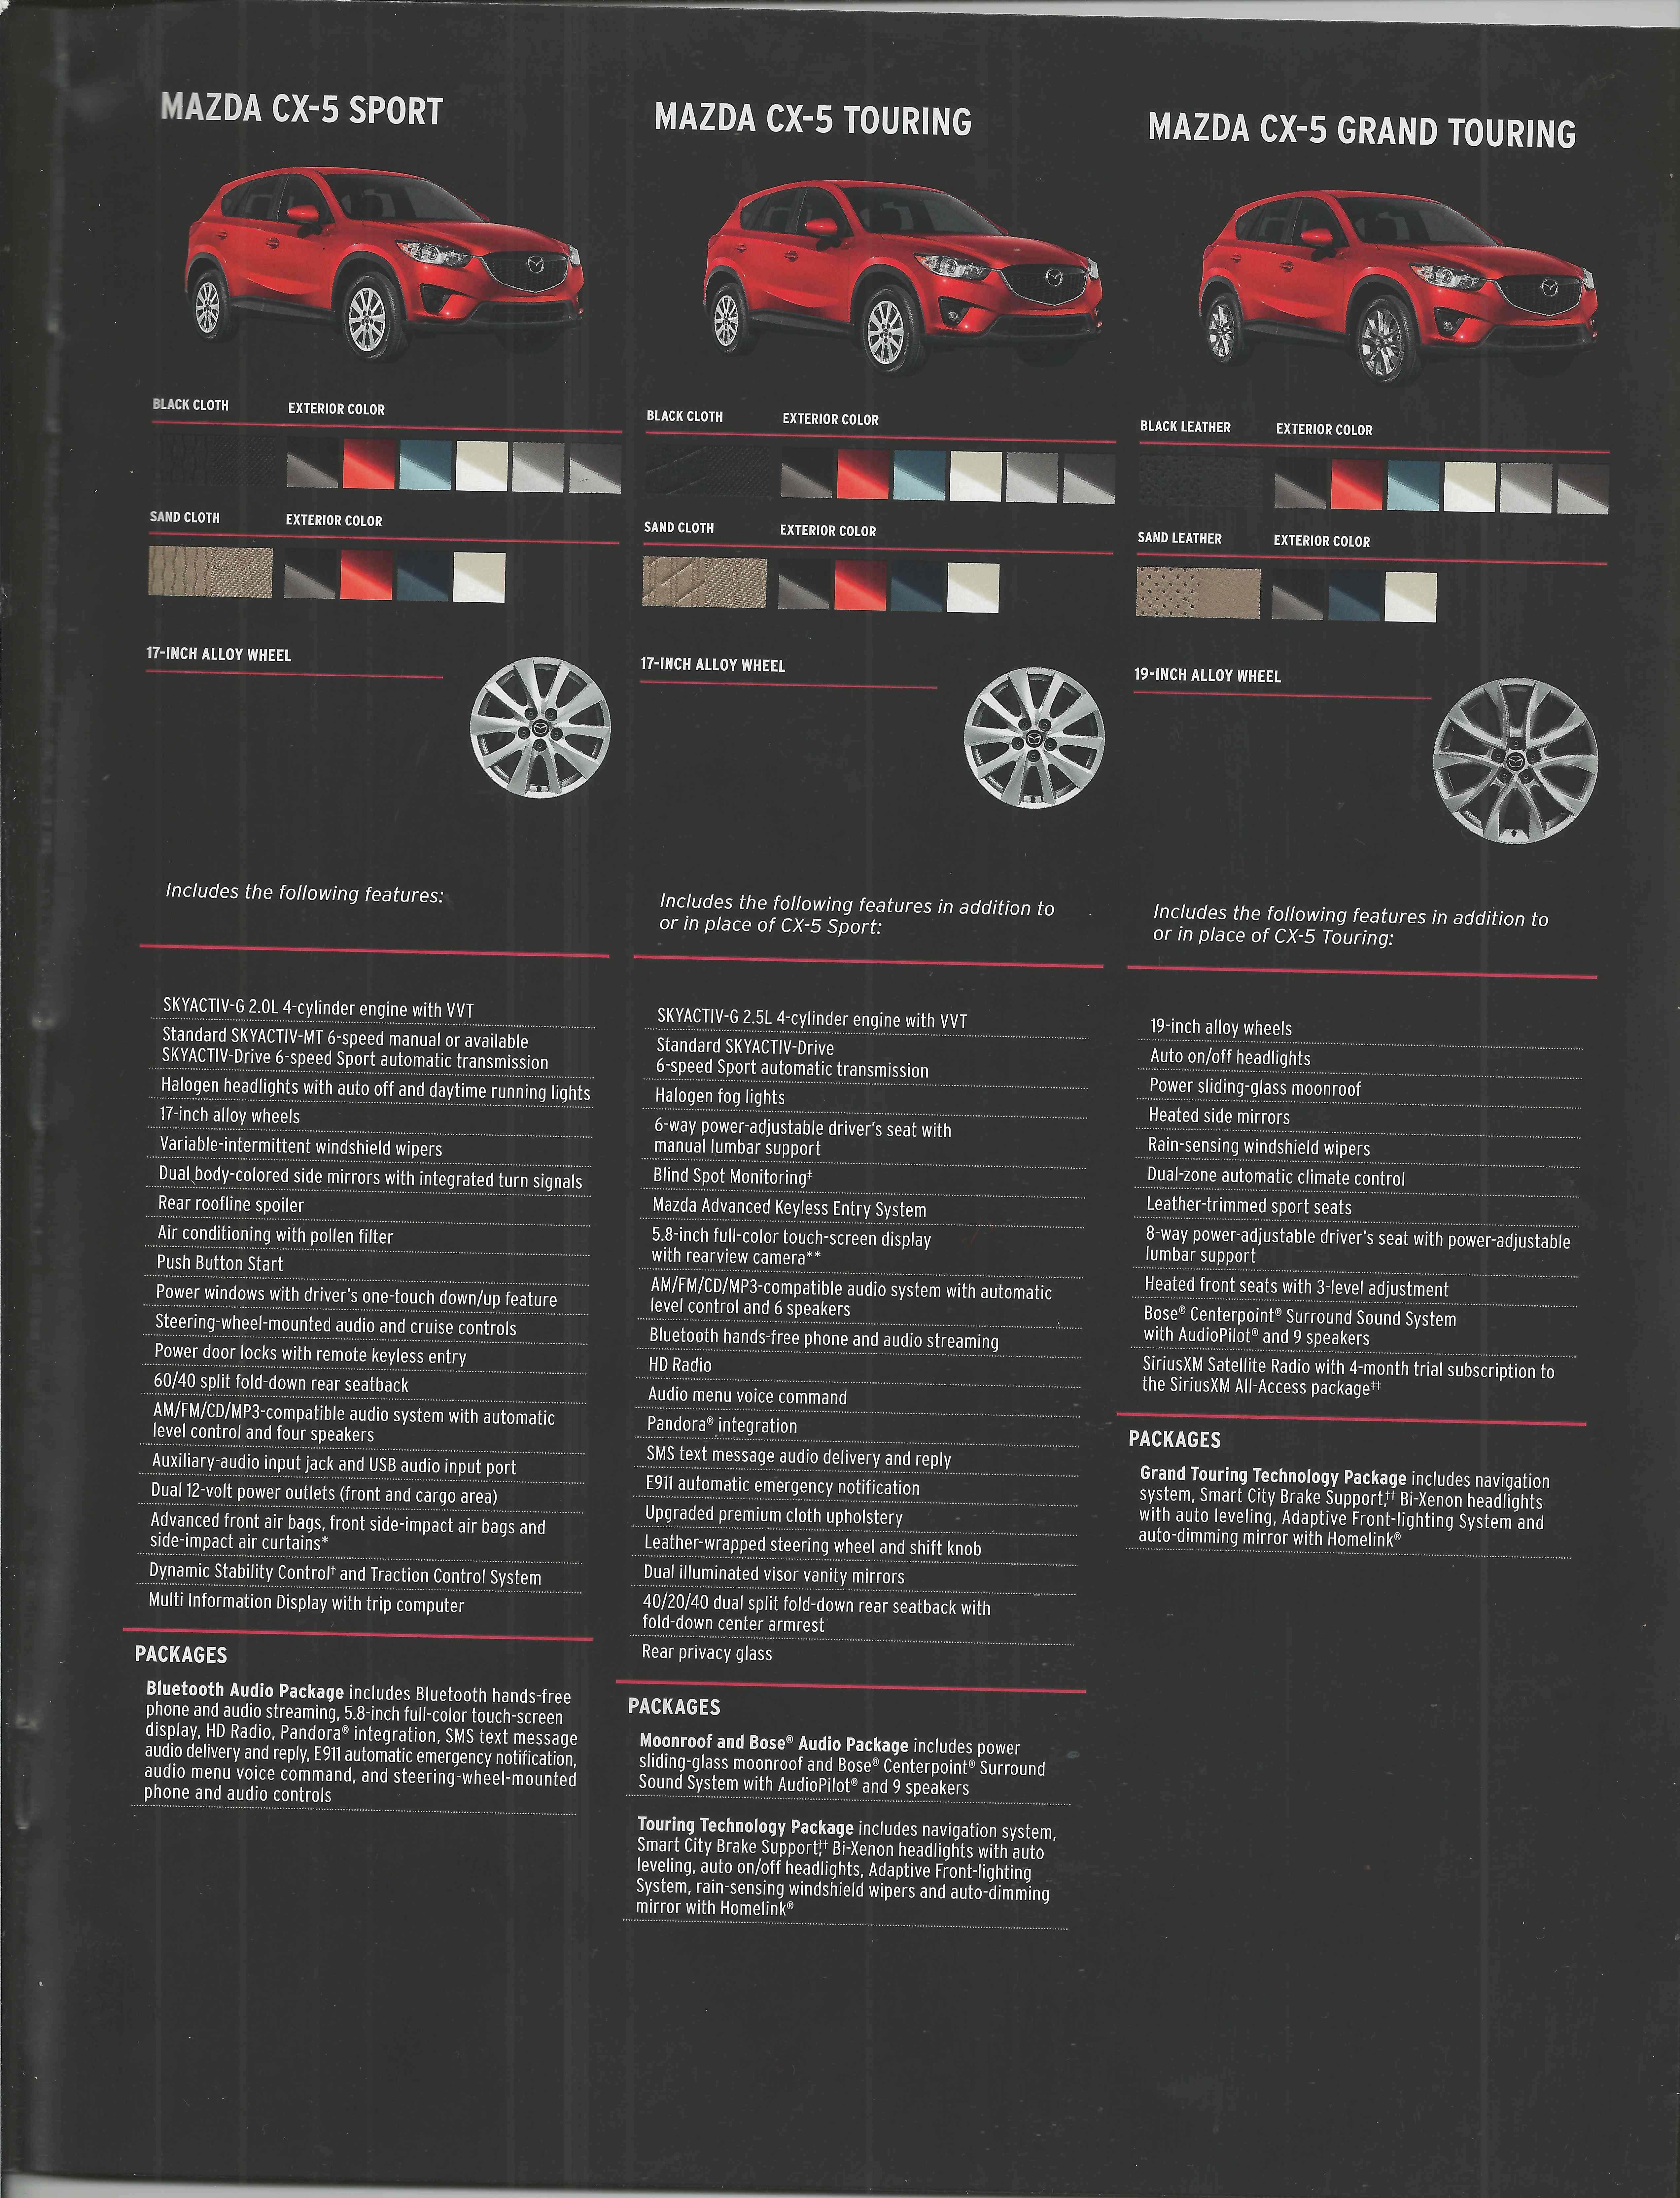 2015 cx-5 features.jpg